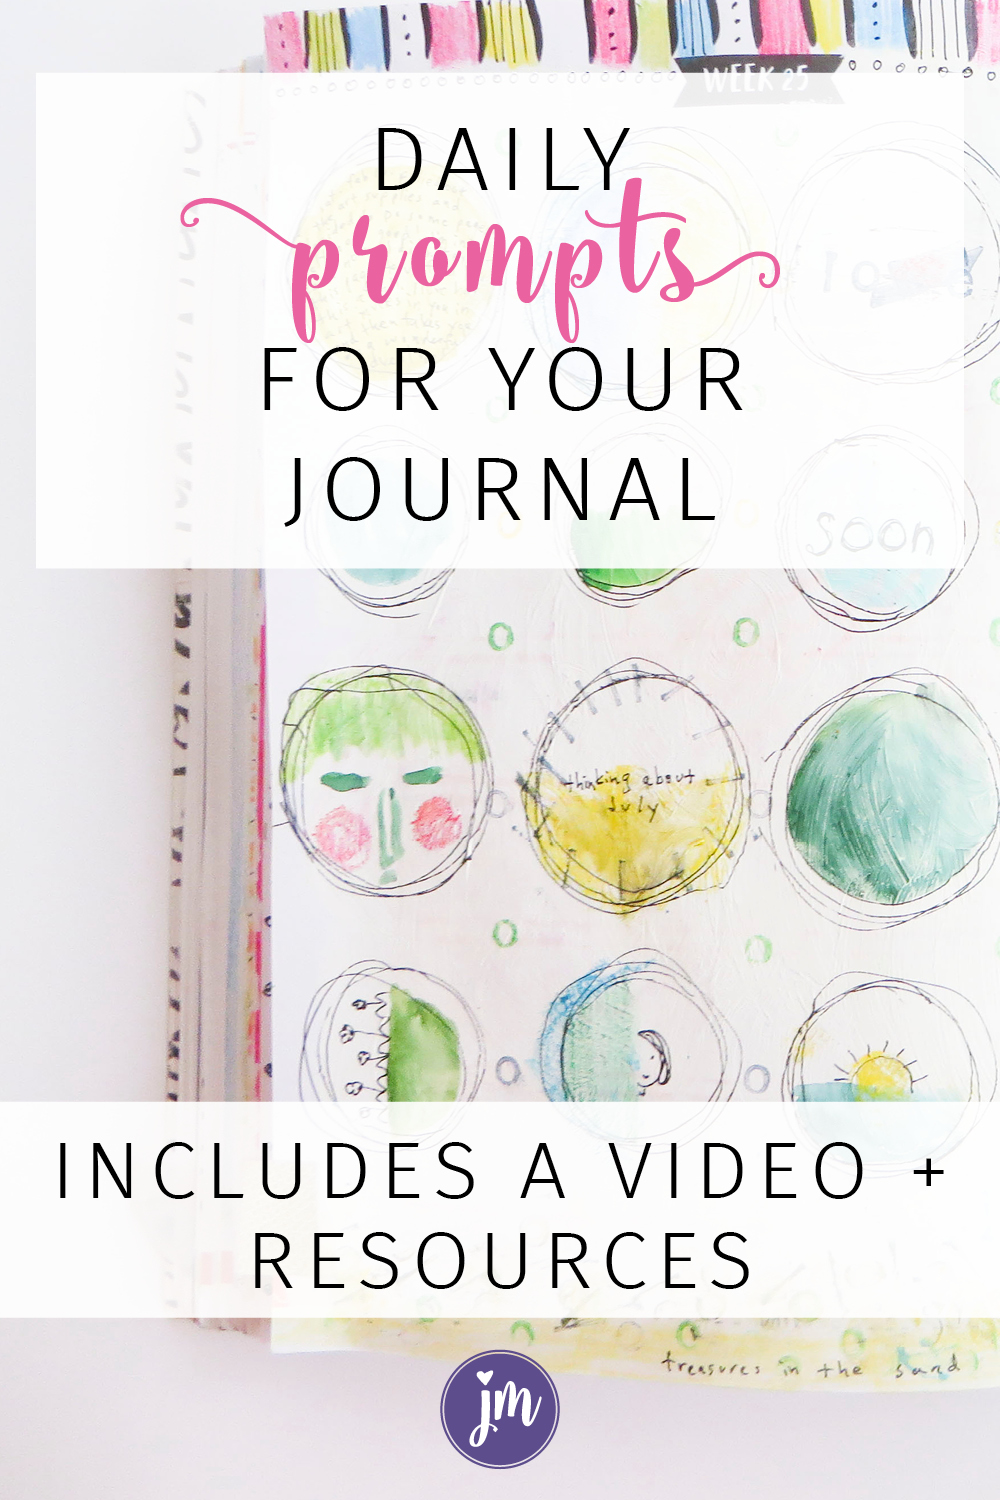 Looking for journal prompts? I LOVE this idea and have been doing it in my happy journal for the last week or so. It looks so amazing! These prompts also work great for bullet journals, dot journals, art journals, and gratitude journals. Try it!